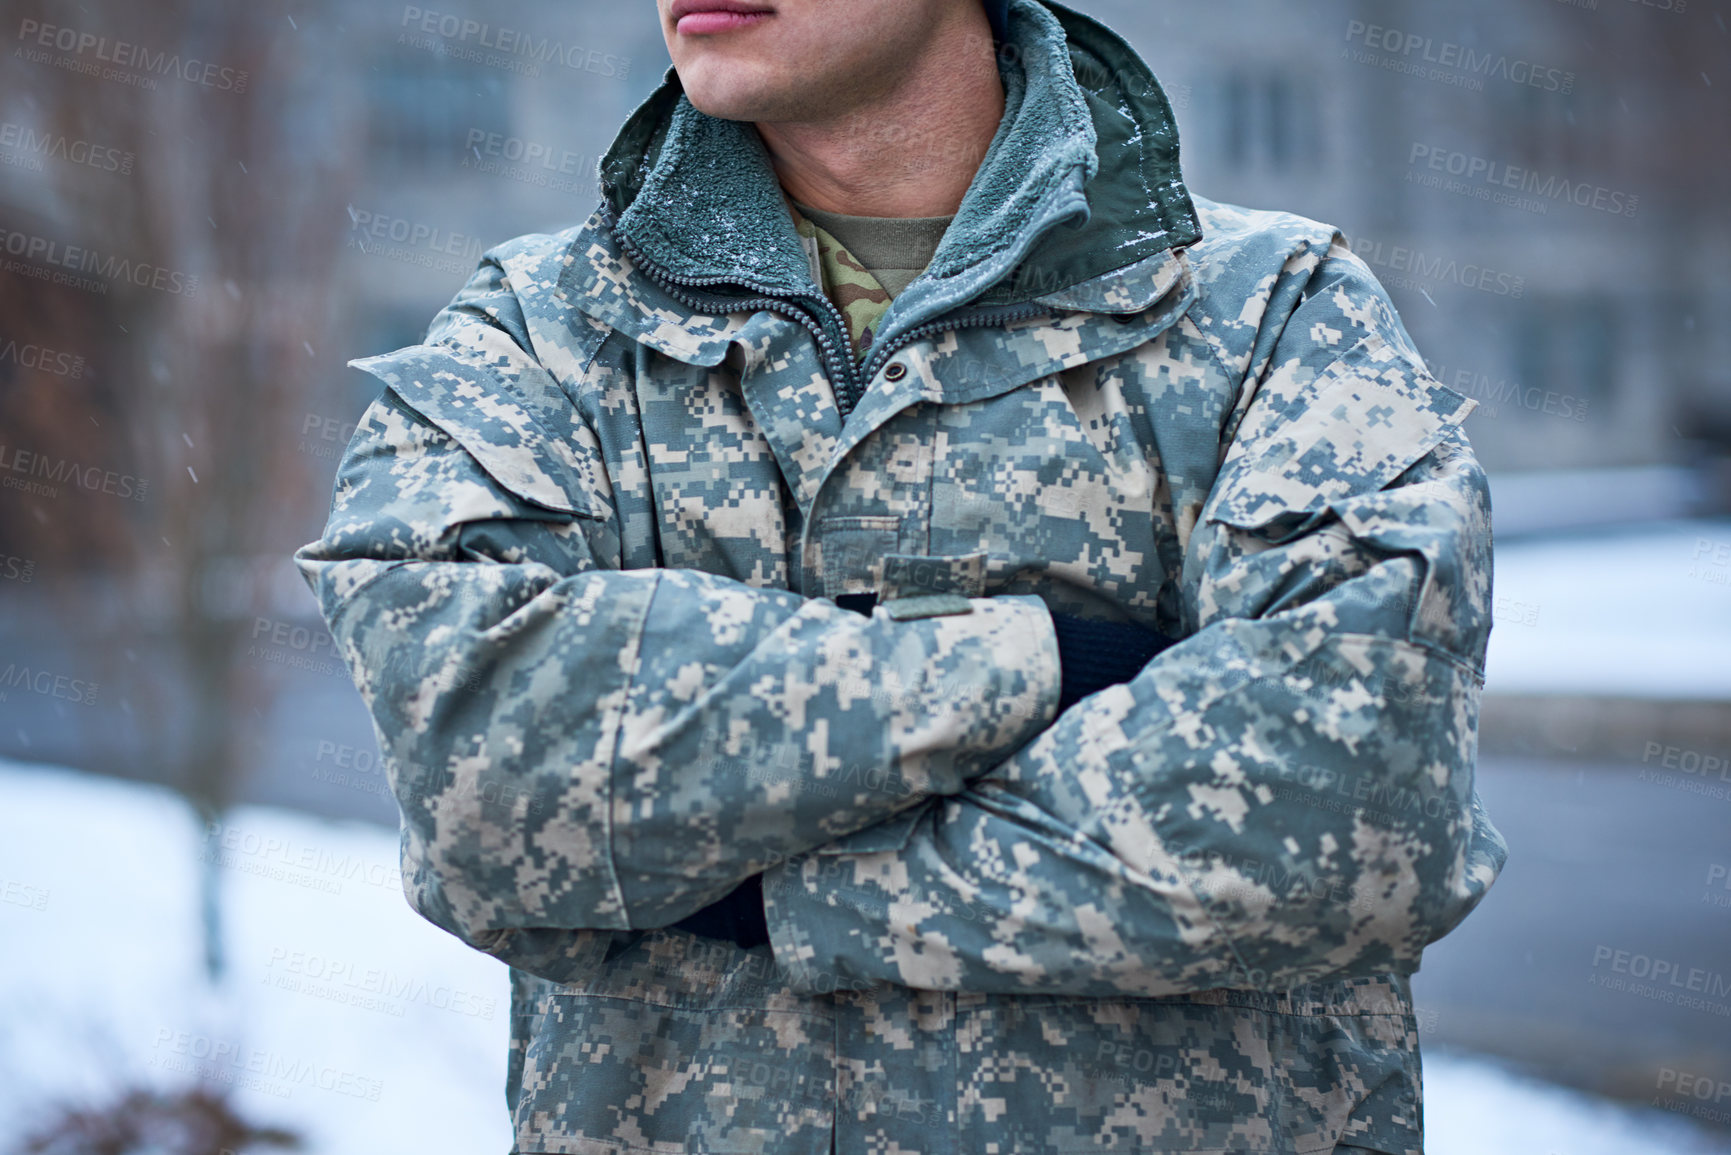 Buy stock photo Cropped shot of a young soldier standing outside on a snowy day at military school